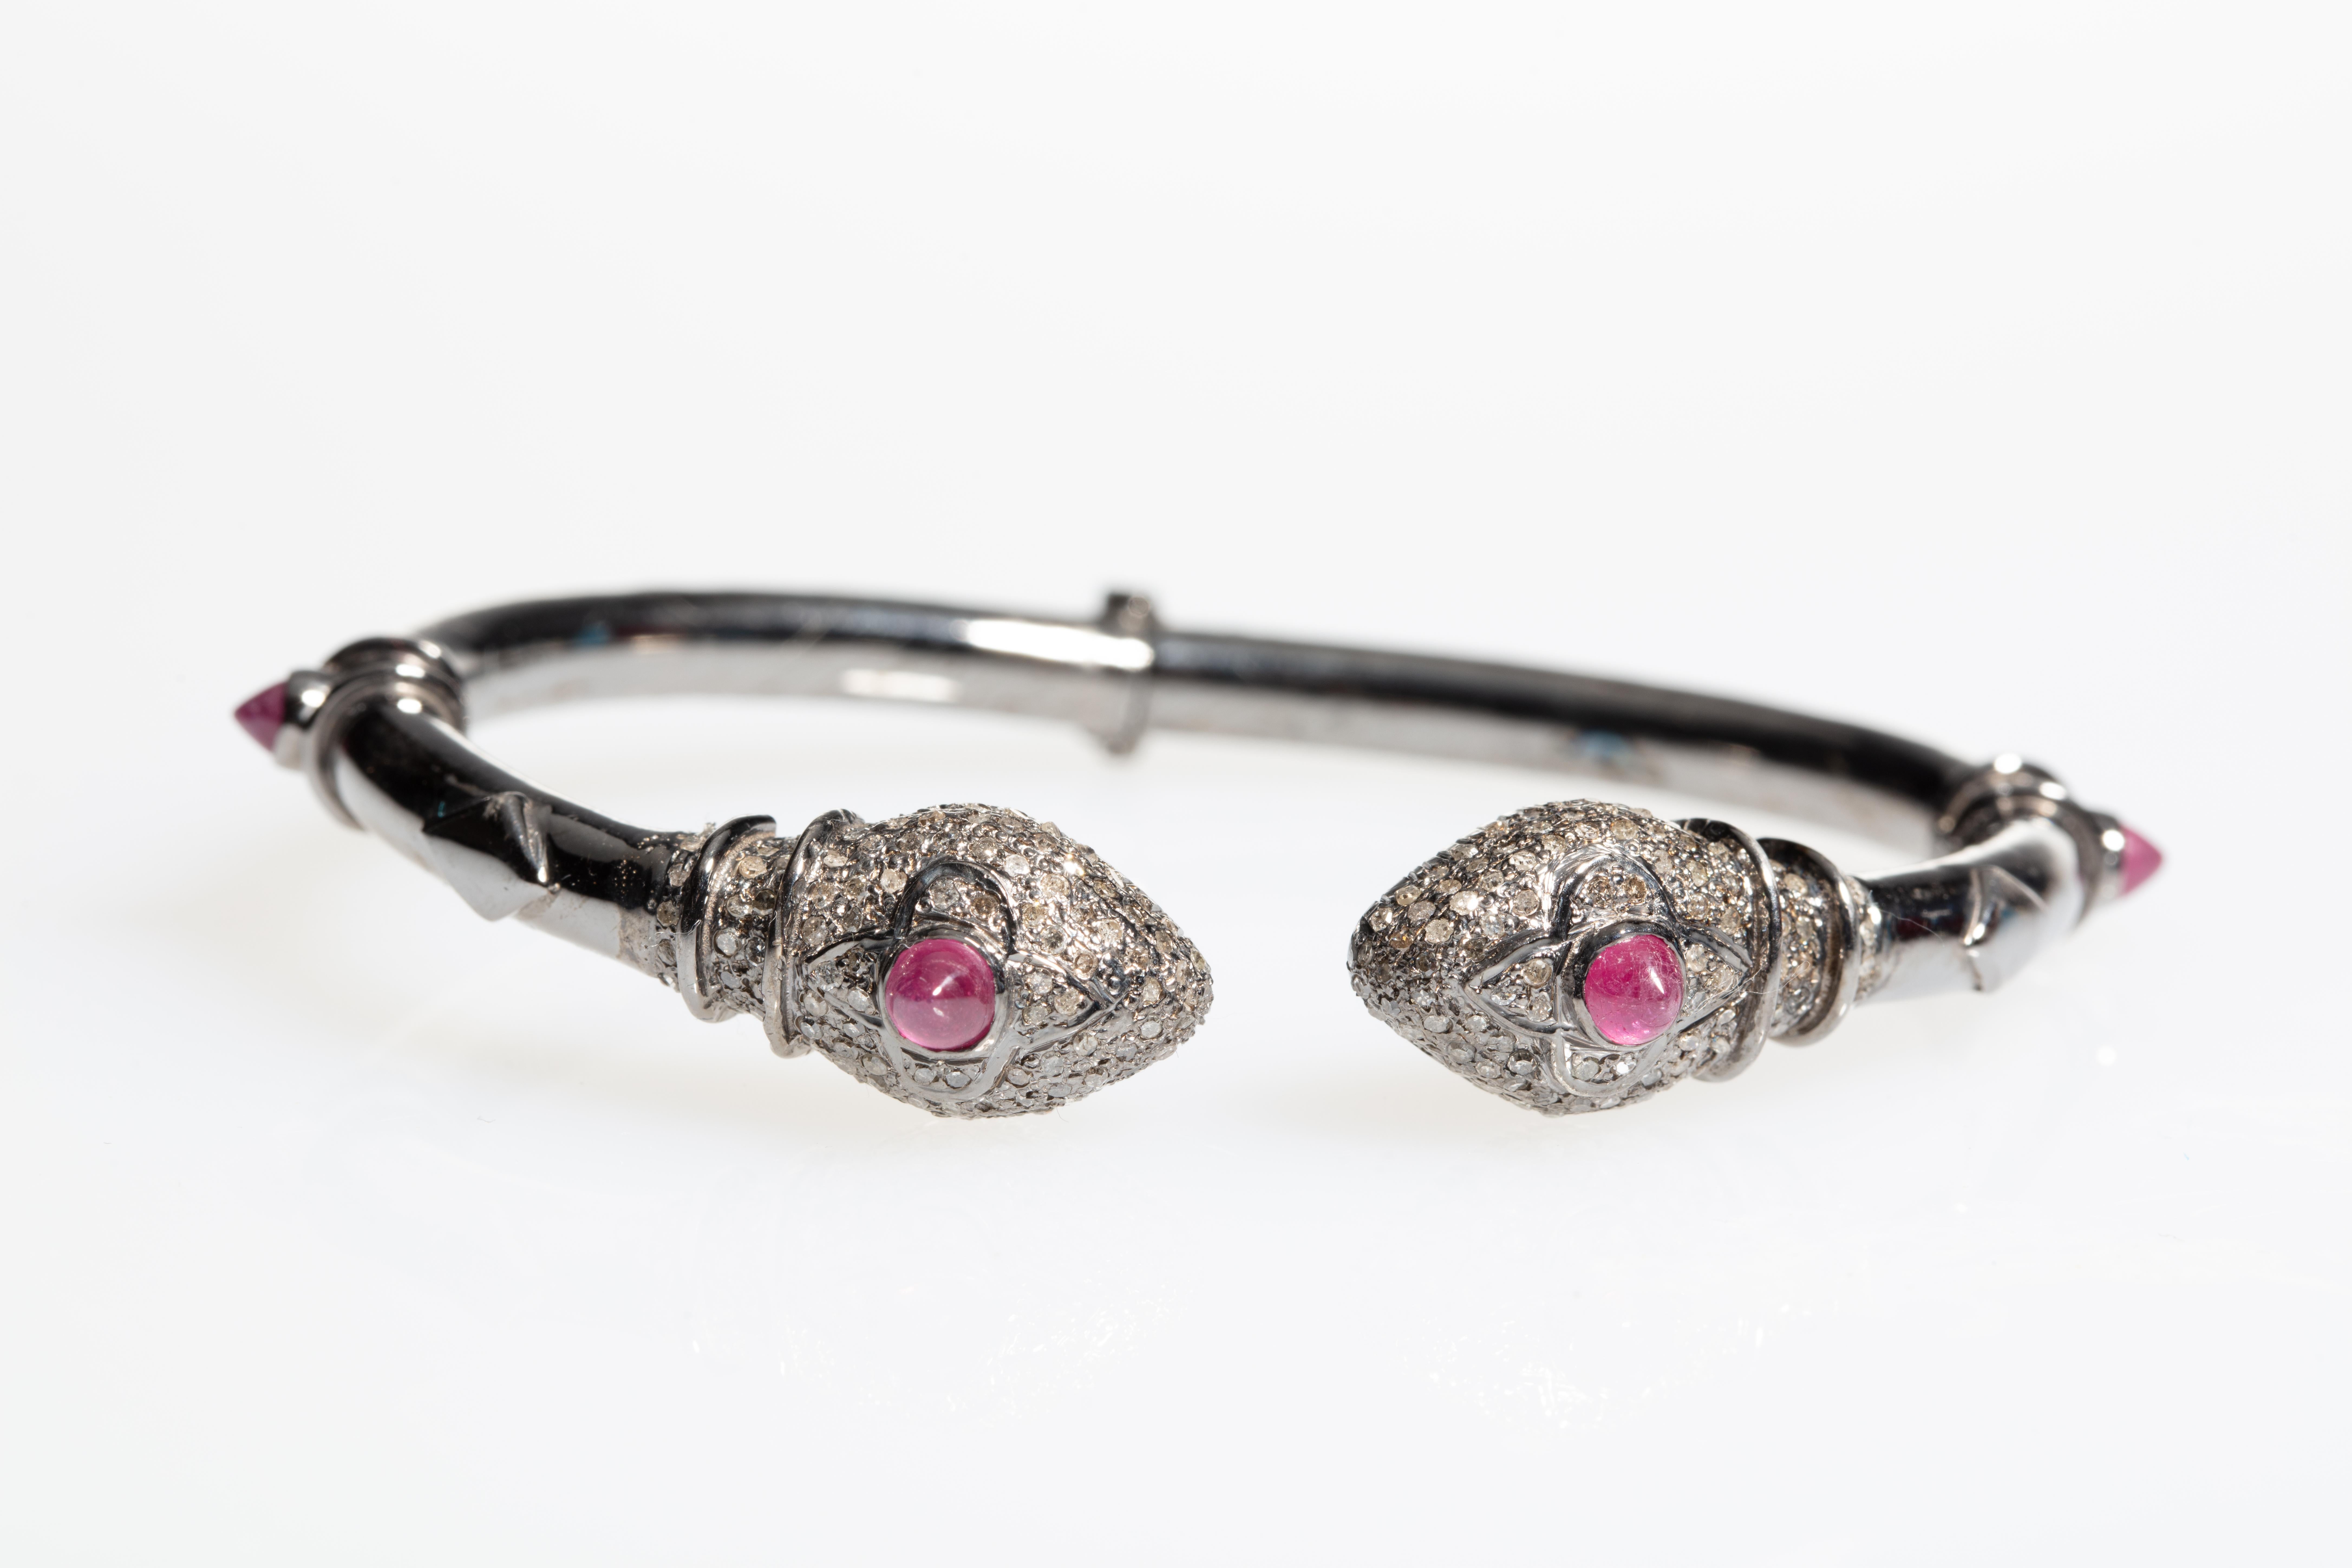 A double-headed snake bracelet with pave-set diamonds on the head and beveled Burmese ruby third eye with rubies at the sides as well.  Set in an oxidized sterling silver.  Hinged at the back for easy on and off.  Oval shape to keep the workmanship